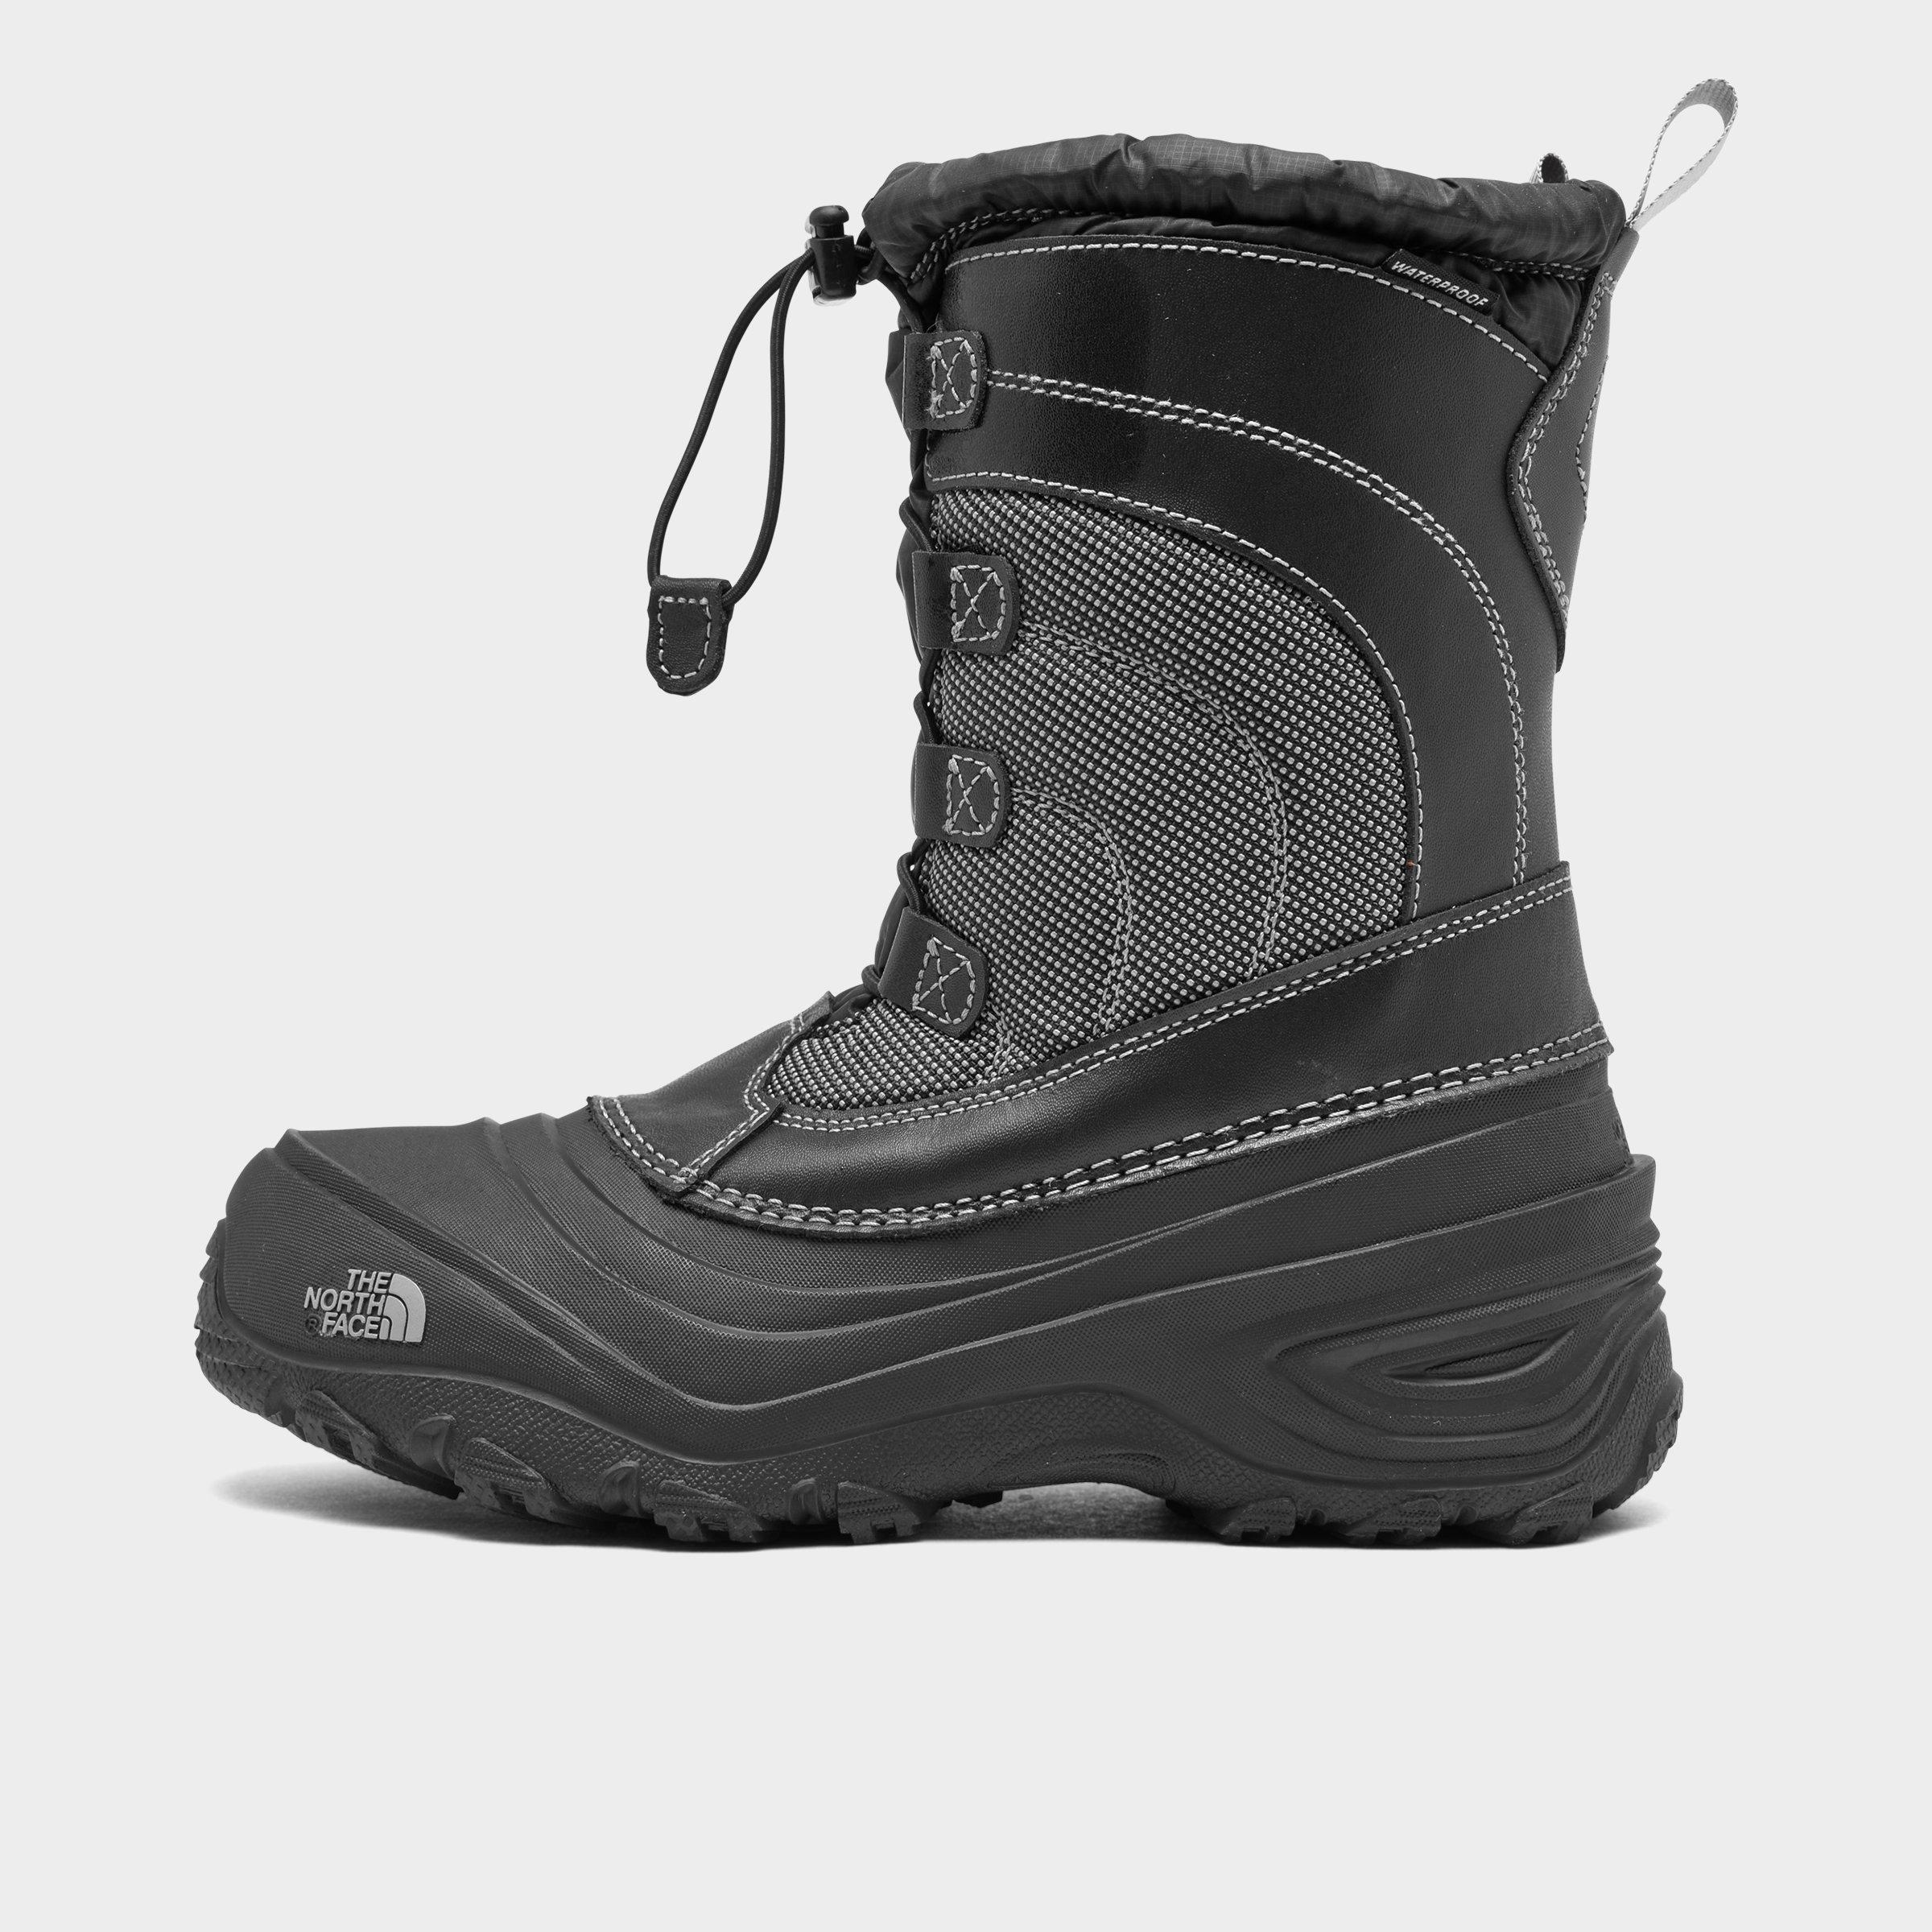 jd north face boots